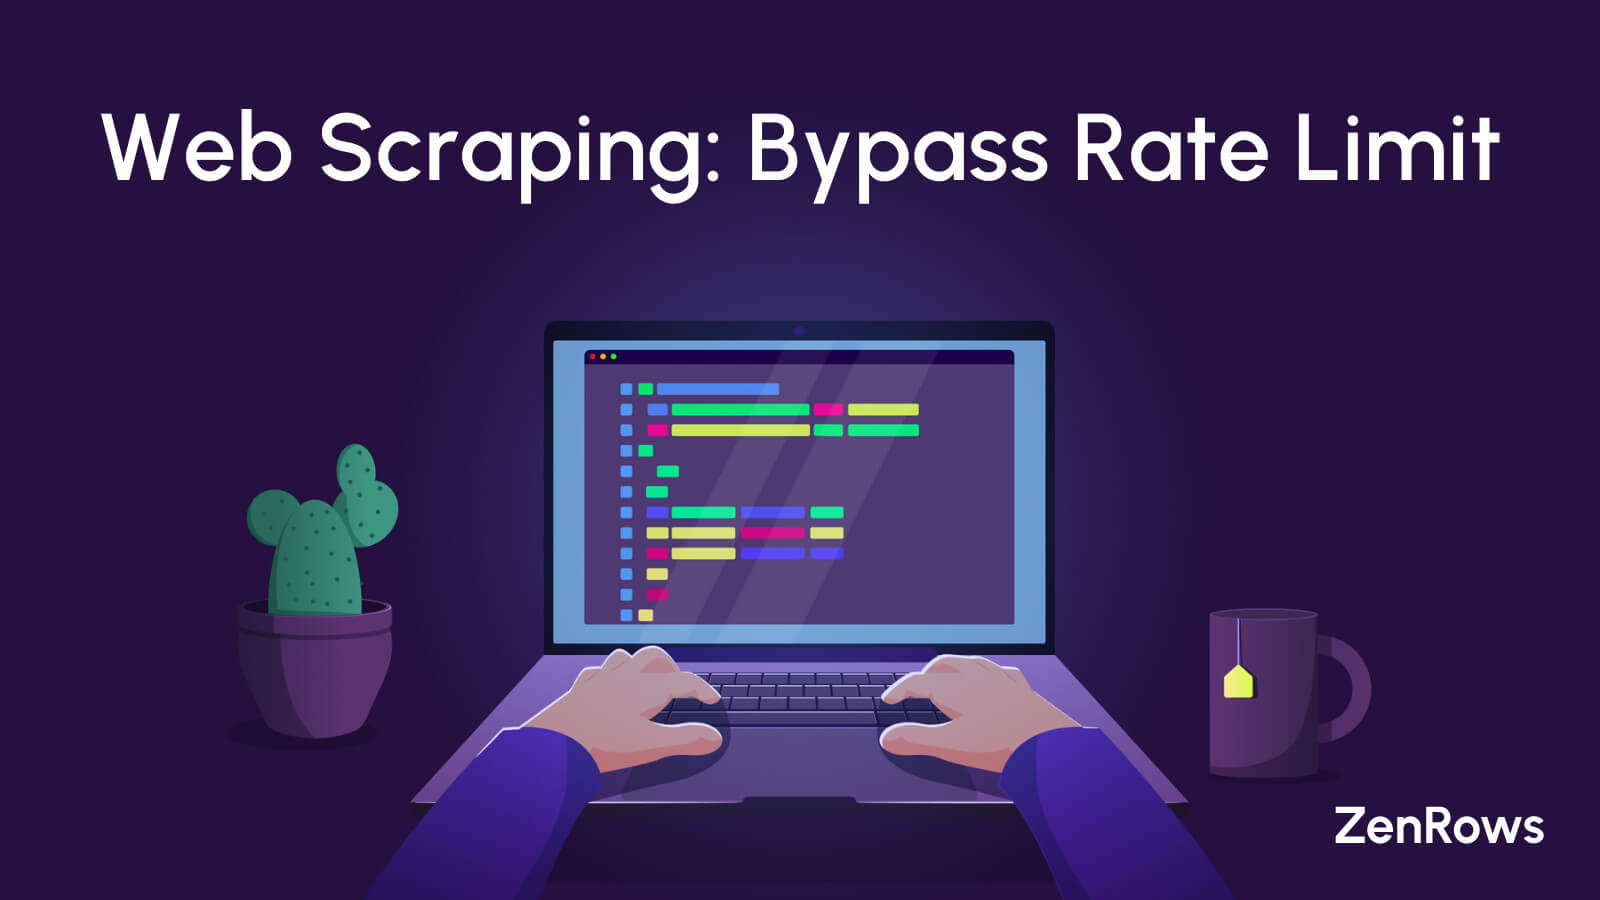 Bypass Rate Limit While Web Scraping Like a Pro